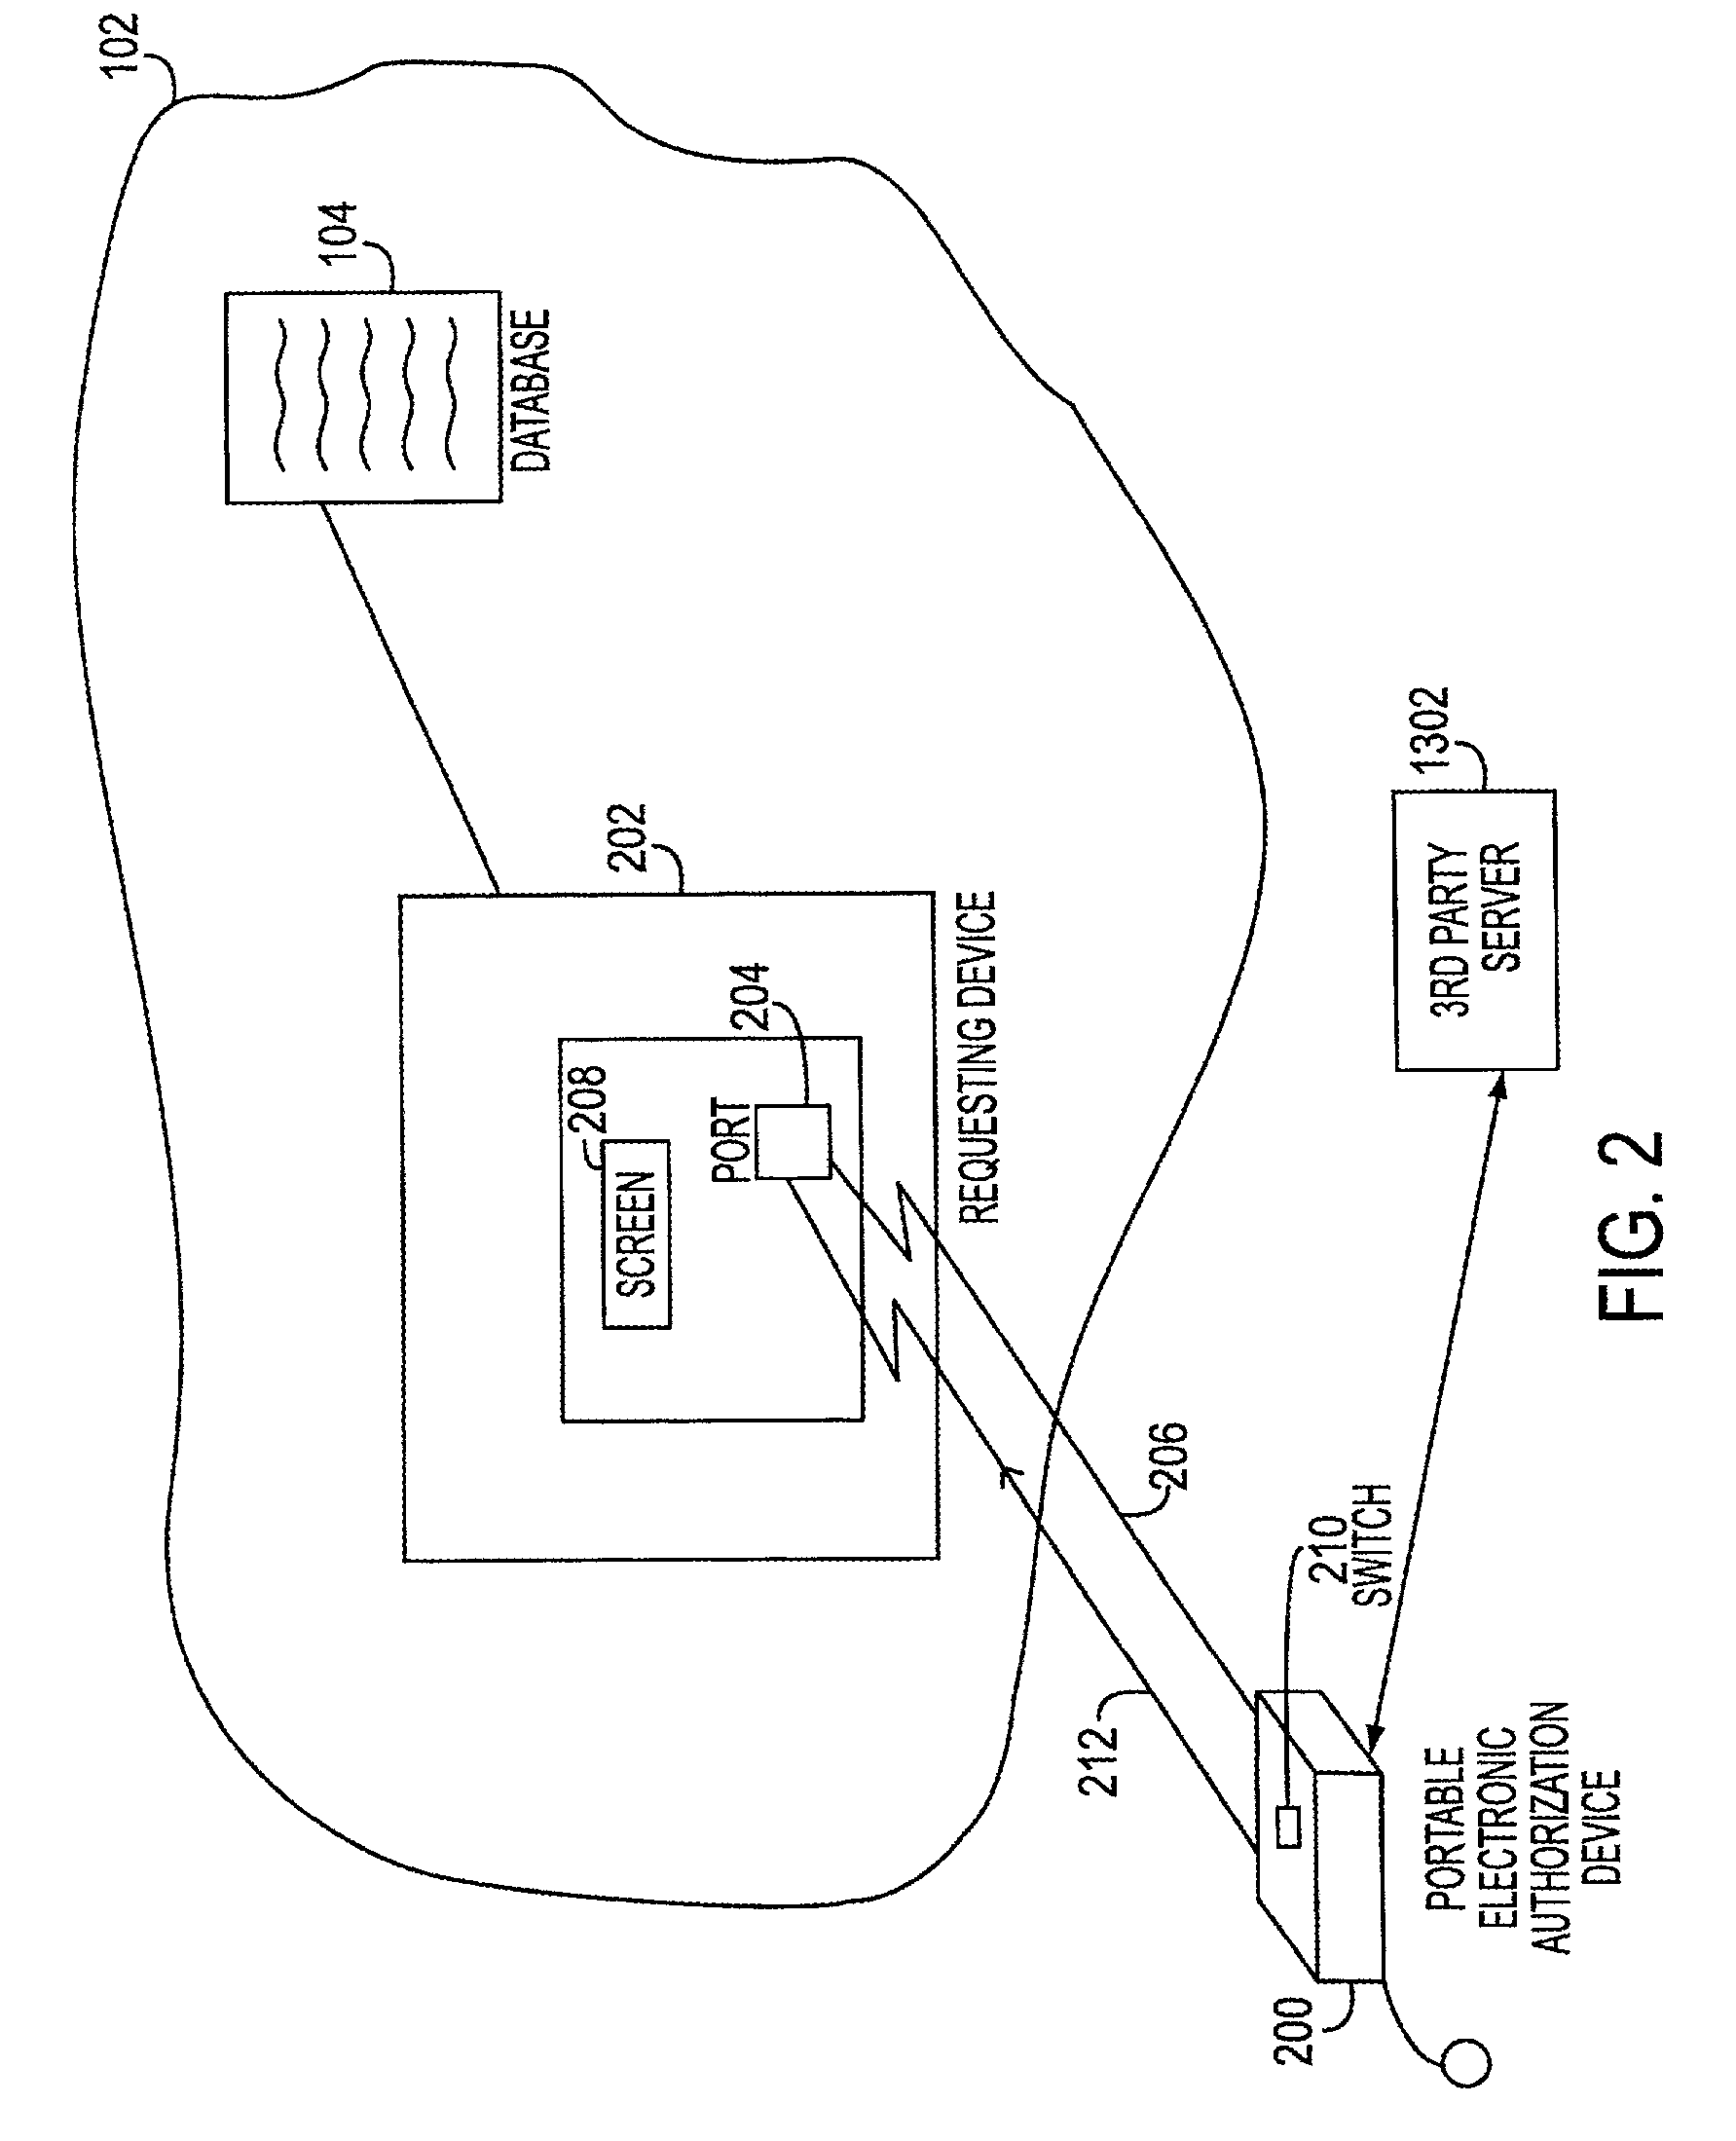 Electronic transaction systems and methods therefor